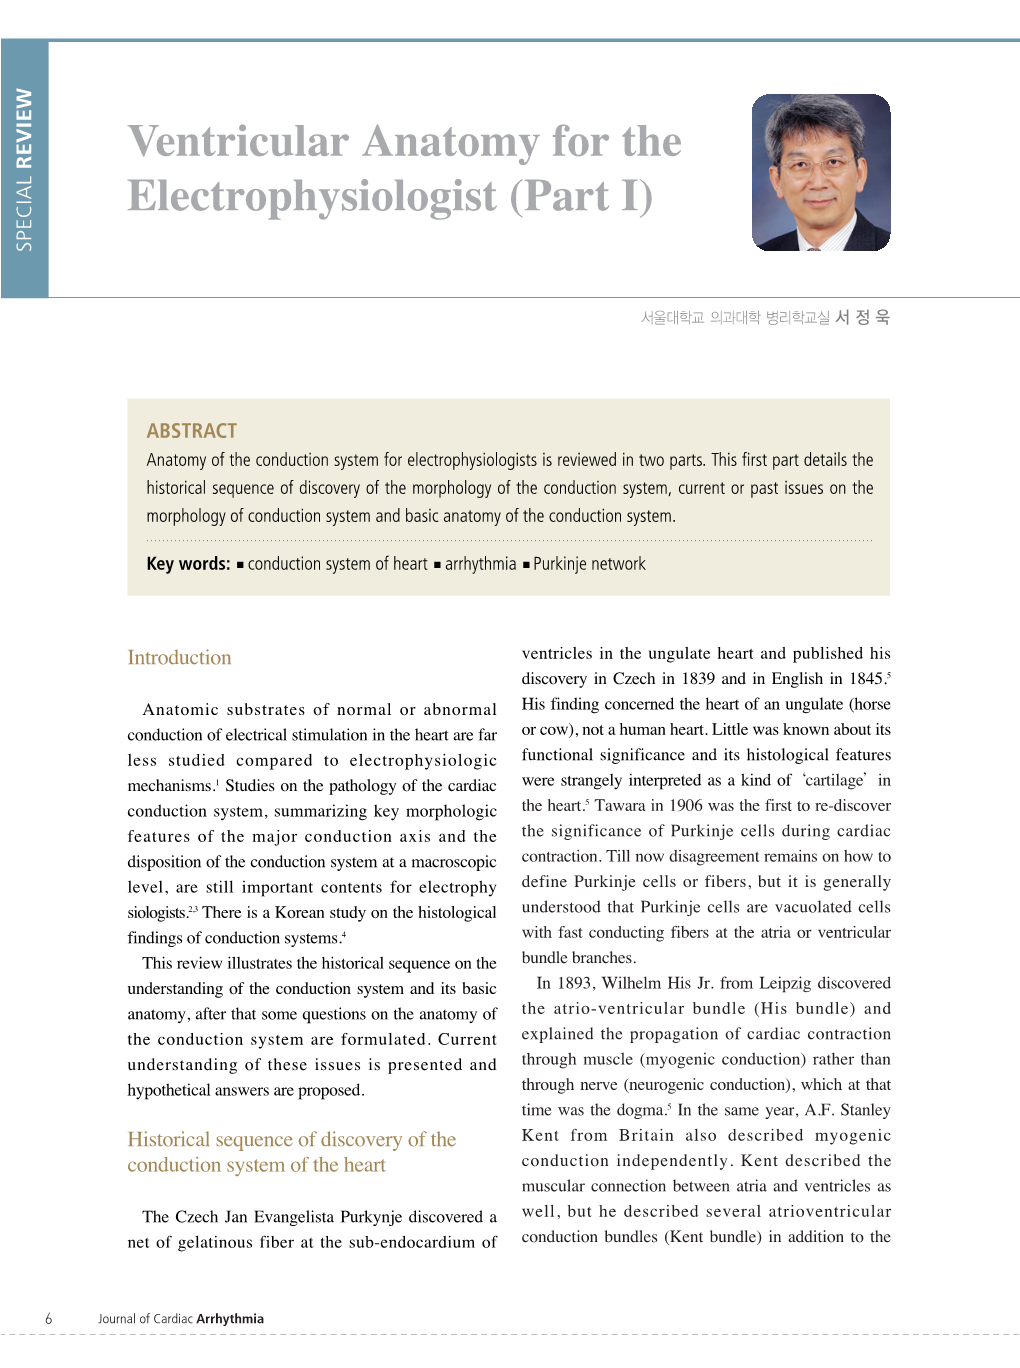 Ventricular Anatomy for the Electrophysiologist (Part I)